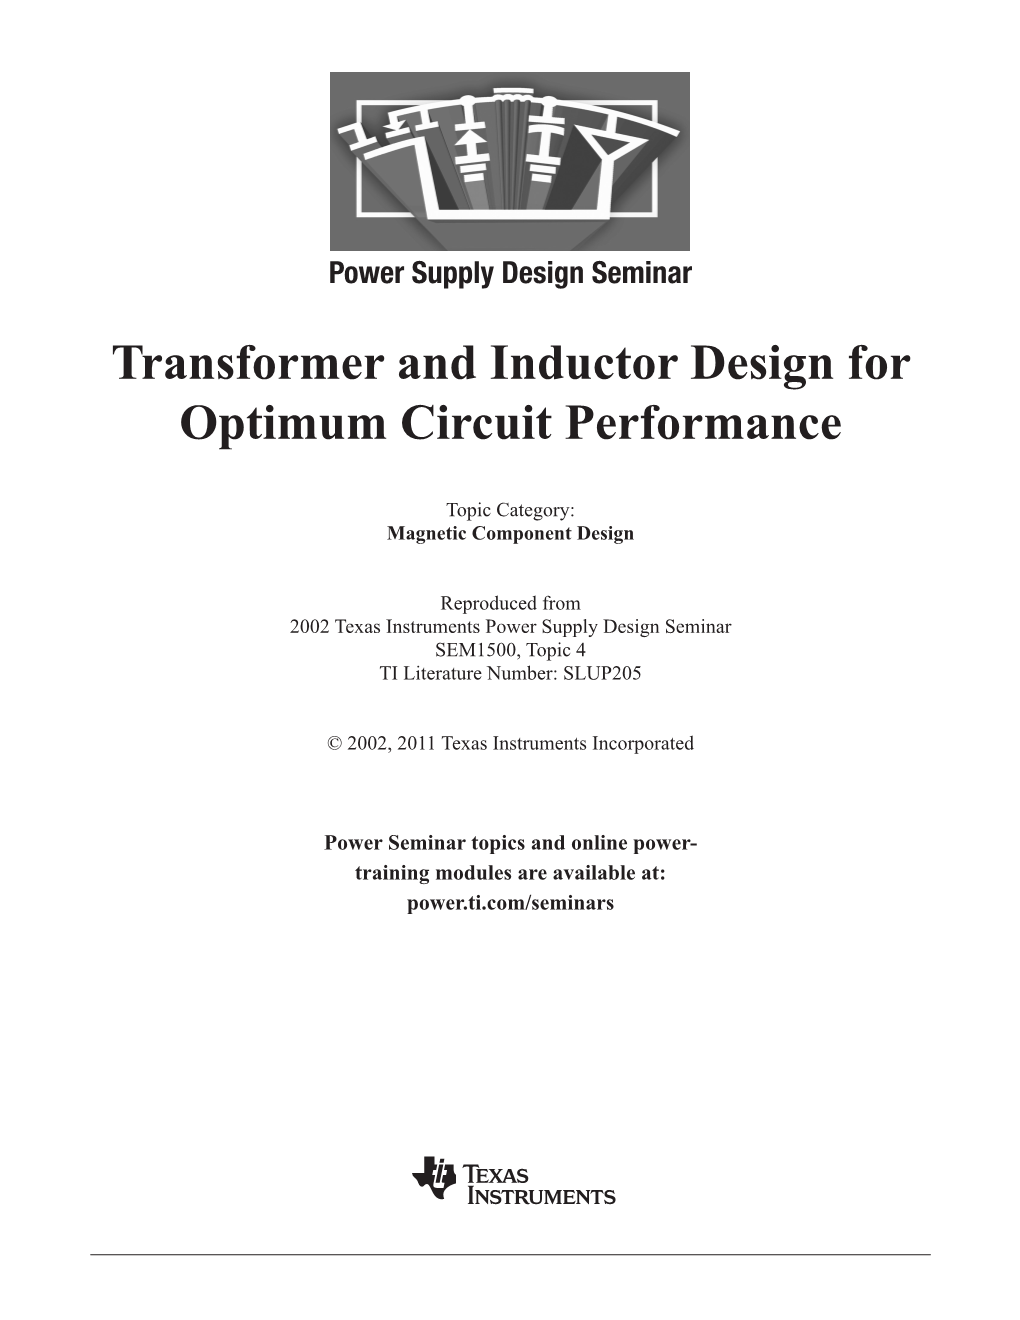 Transformer and Inductor Design for Optimum Circuit Performance